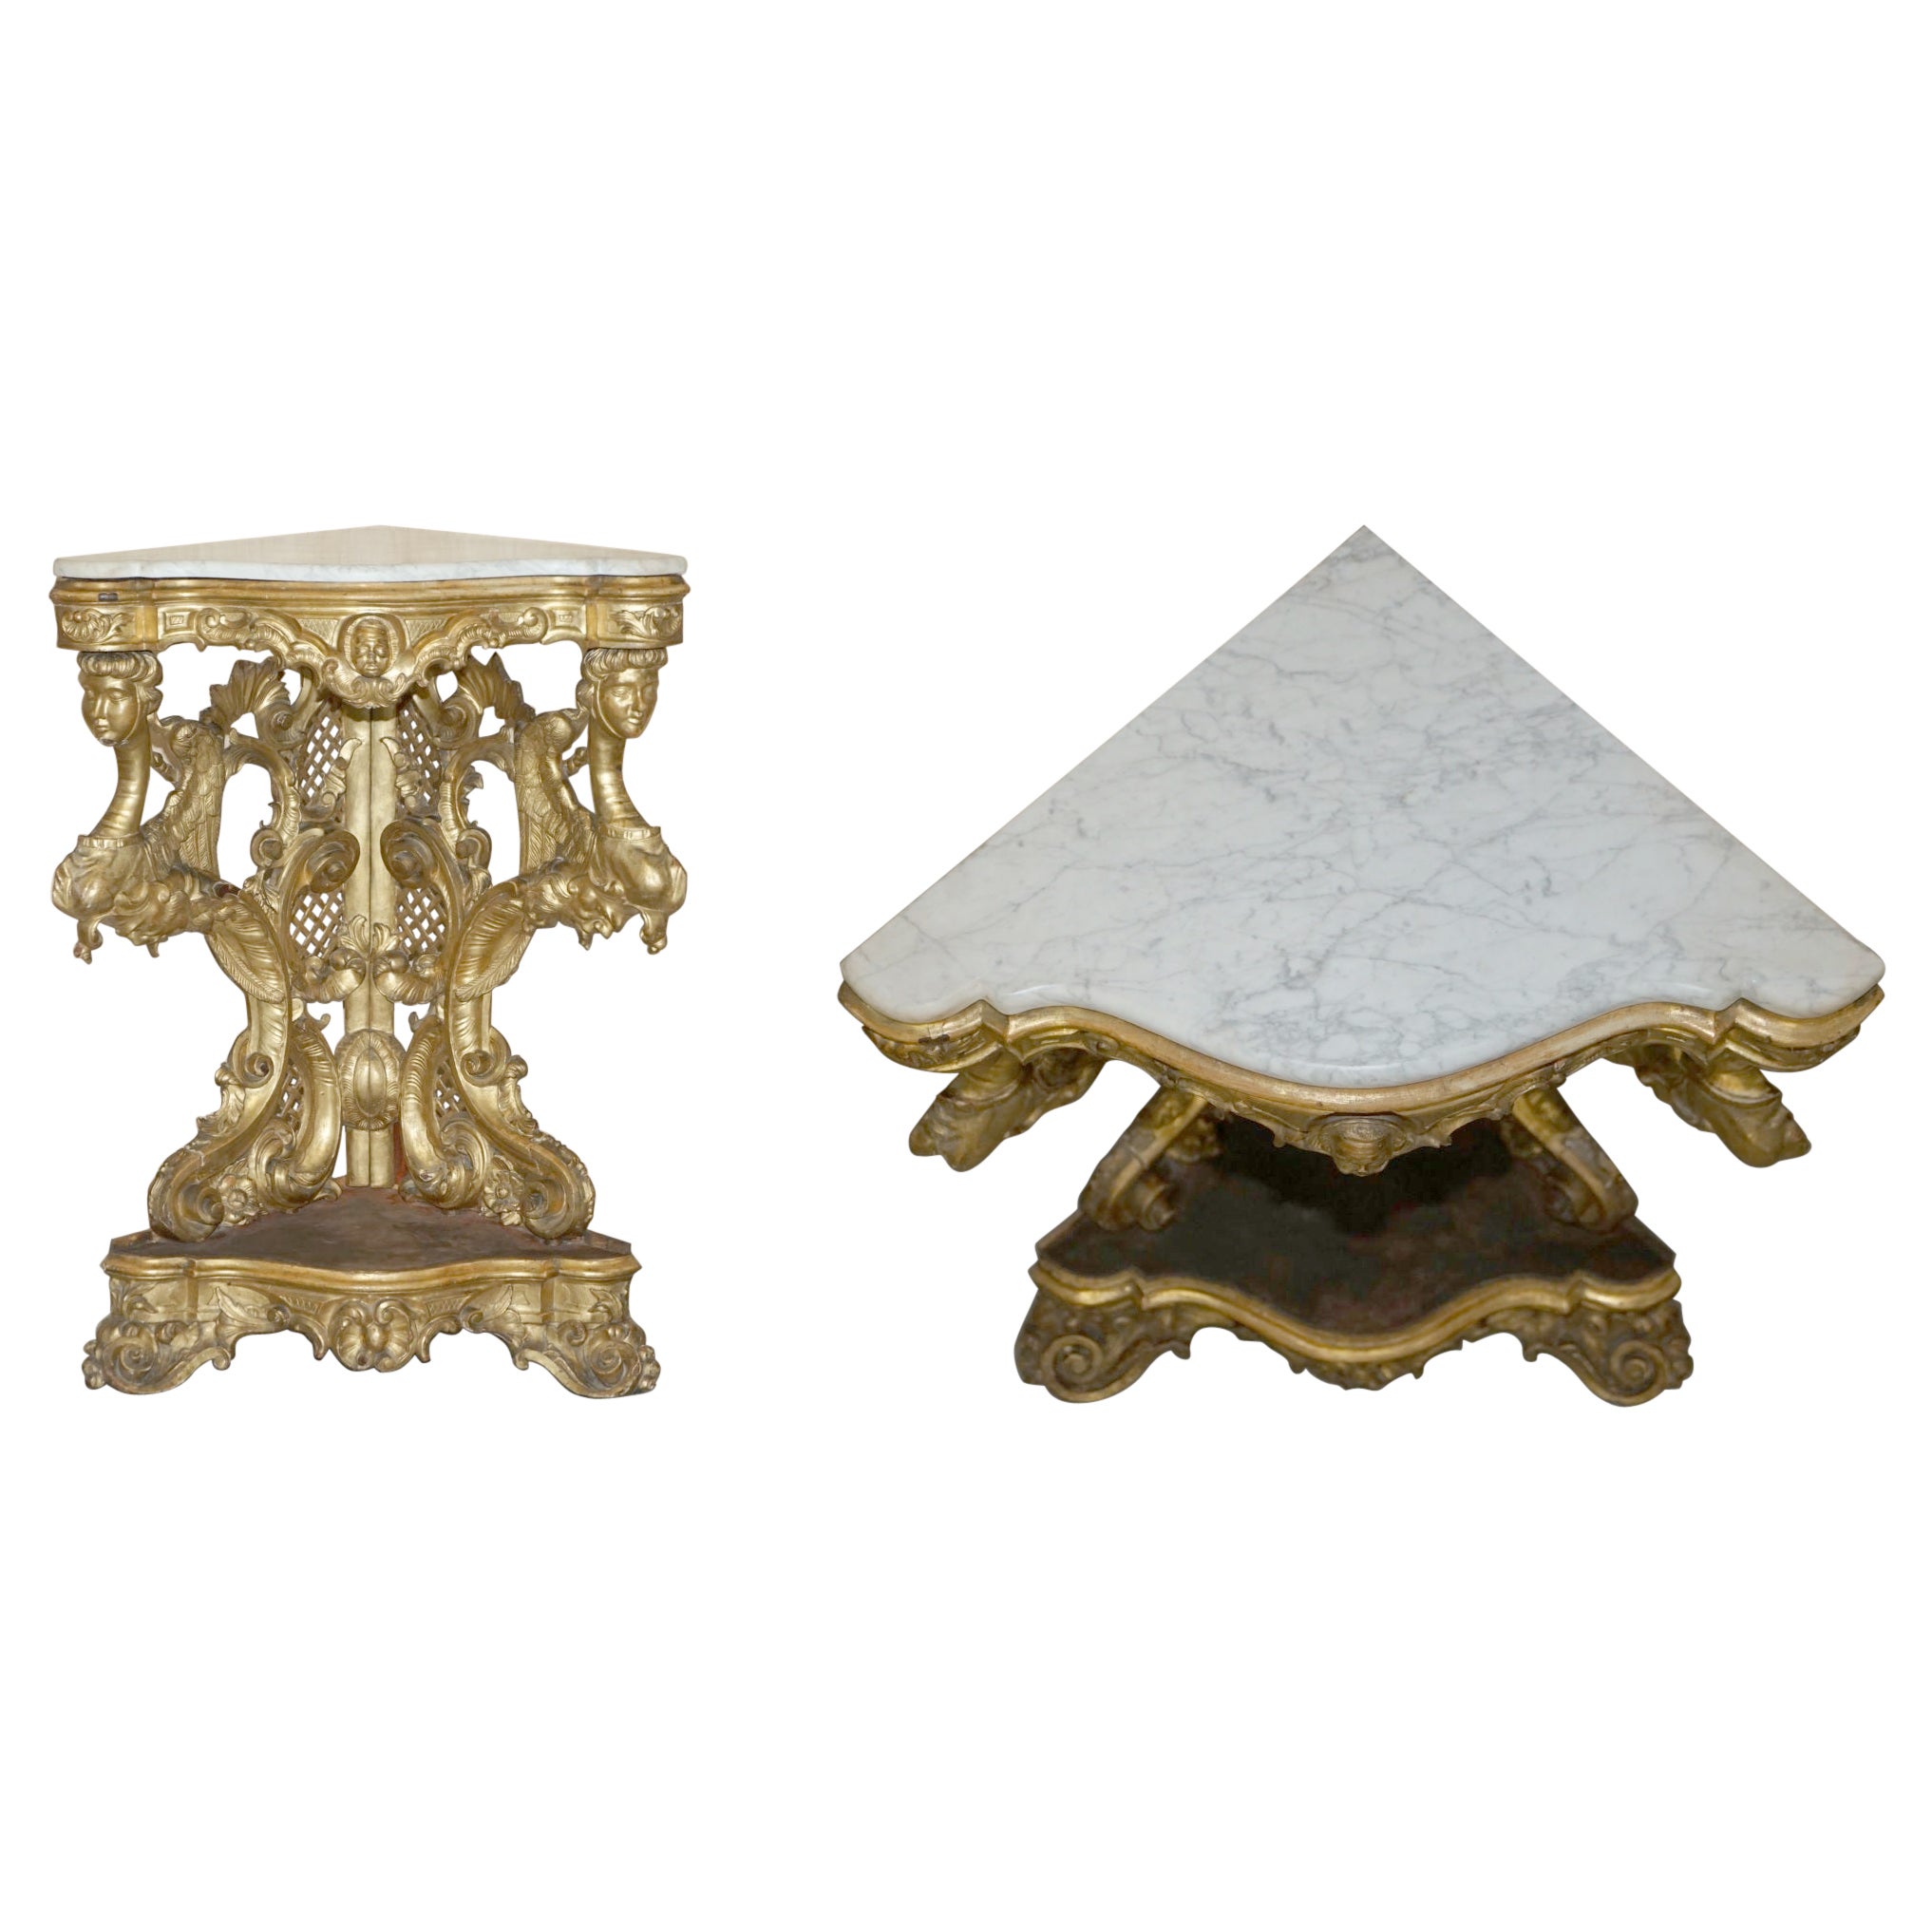 Exquisite Antique Italian Gold Giltwood Italian Marble Herm Carved Corner Table For Sale